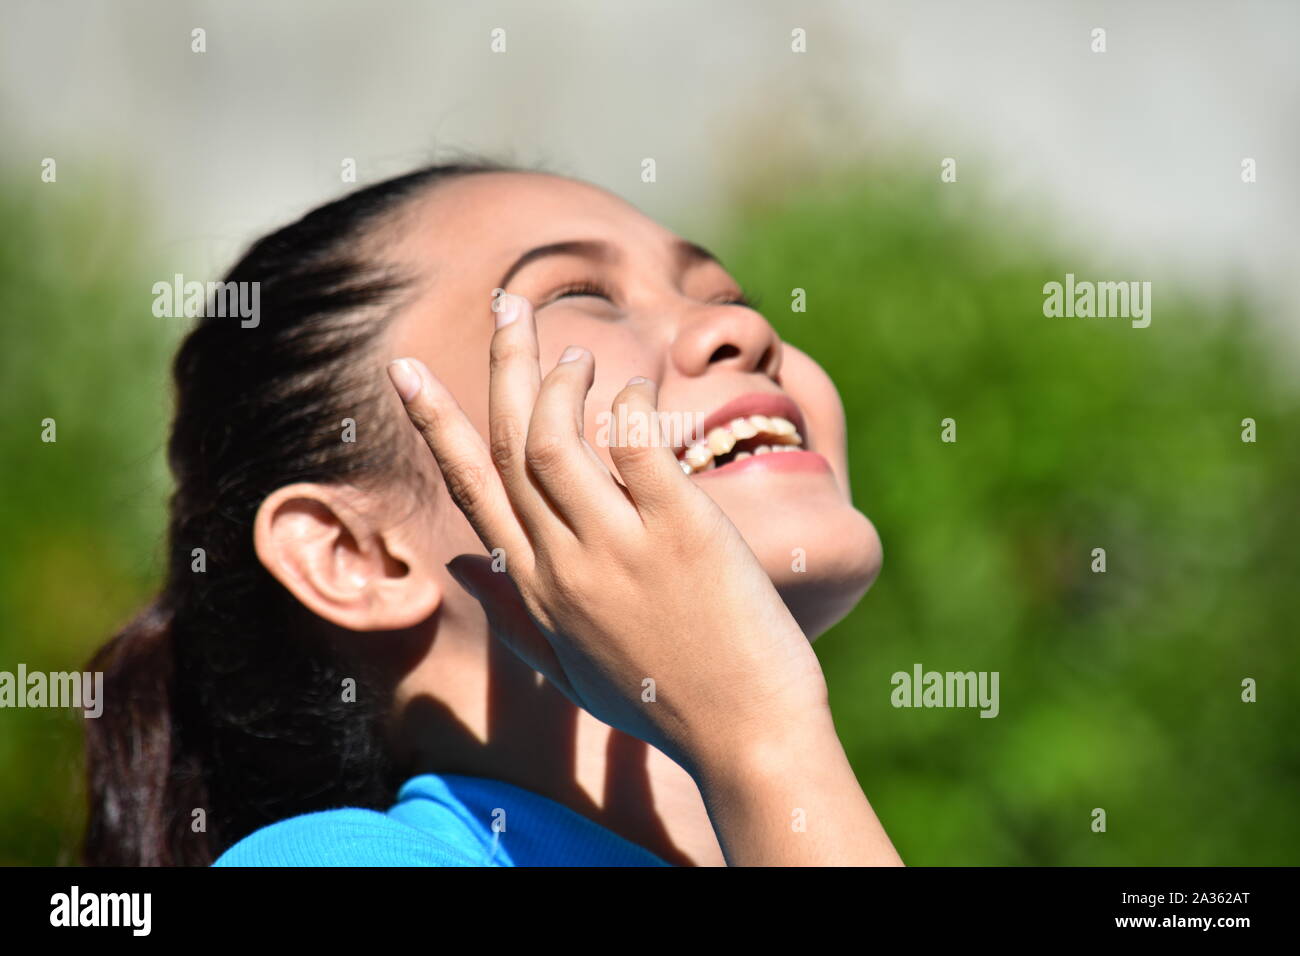 An An Adult Female Laughing Stock Photo